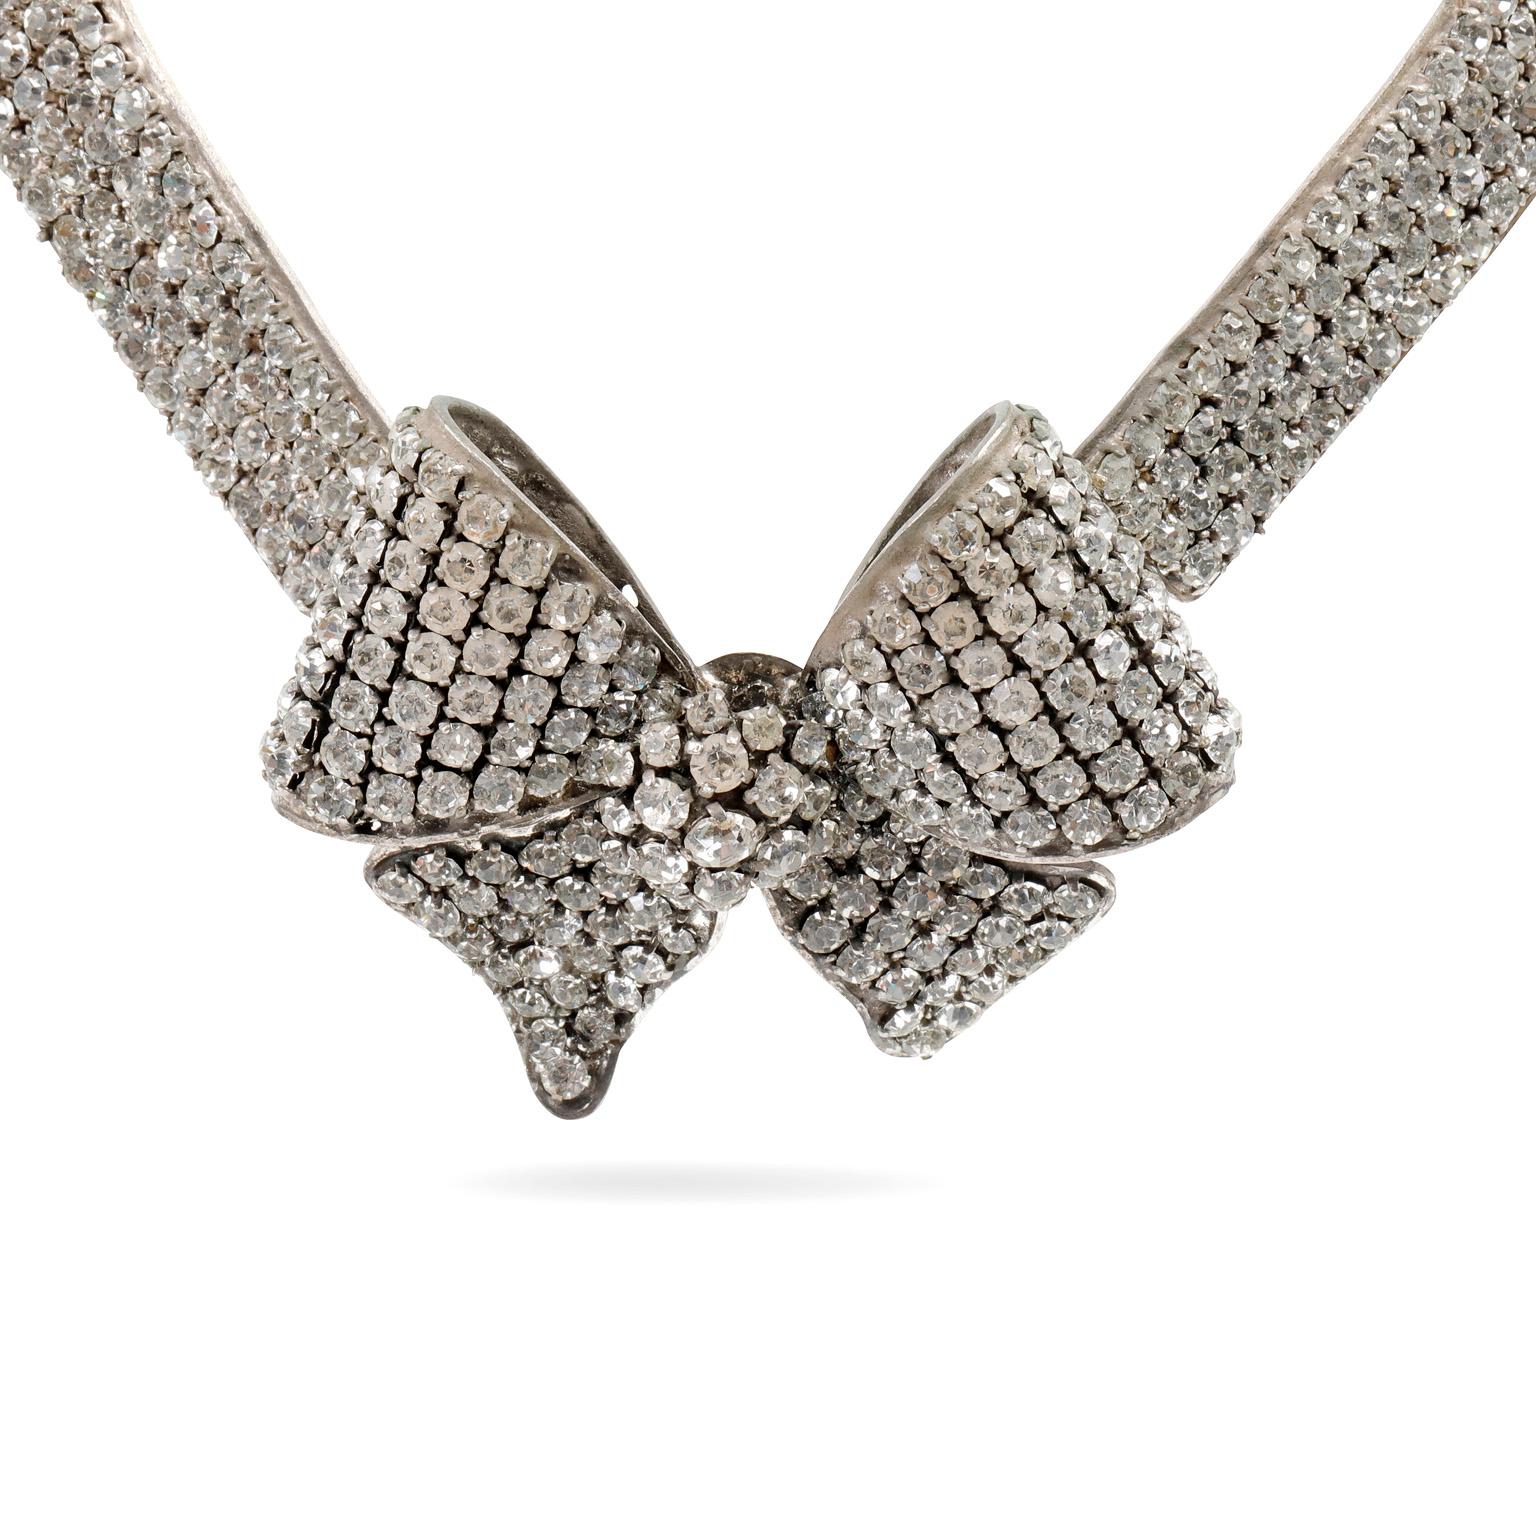 This authentic Chanel Crystal Bow Choker is in beautiful vintage condition from the Fall 1993 collection.  A rare and stunning statement necklace, it is a must have for collectors. 
Four rows of clear crystals culminate in a central crystal